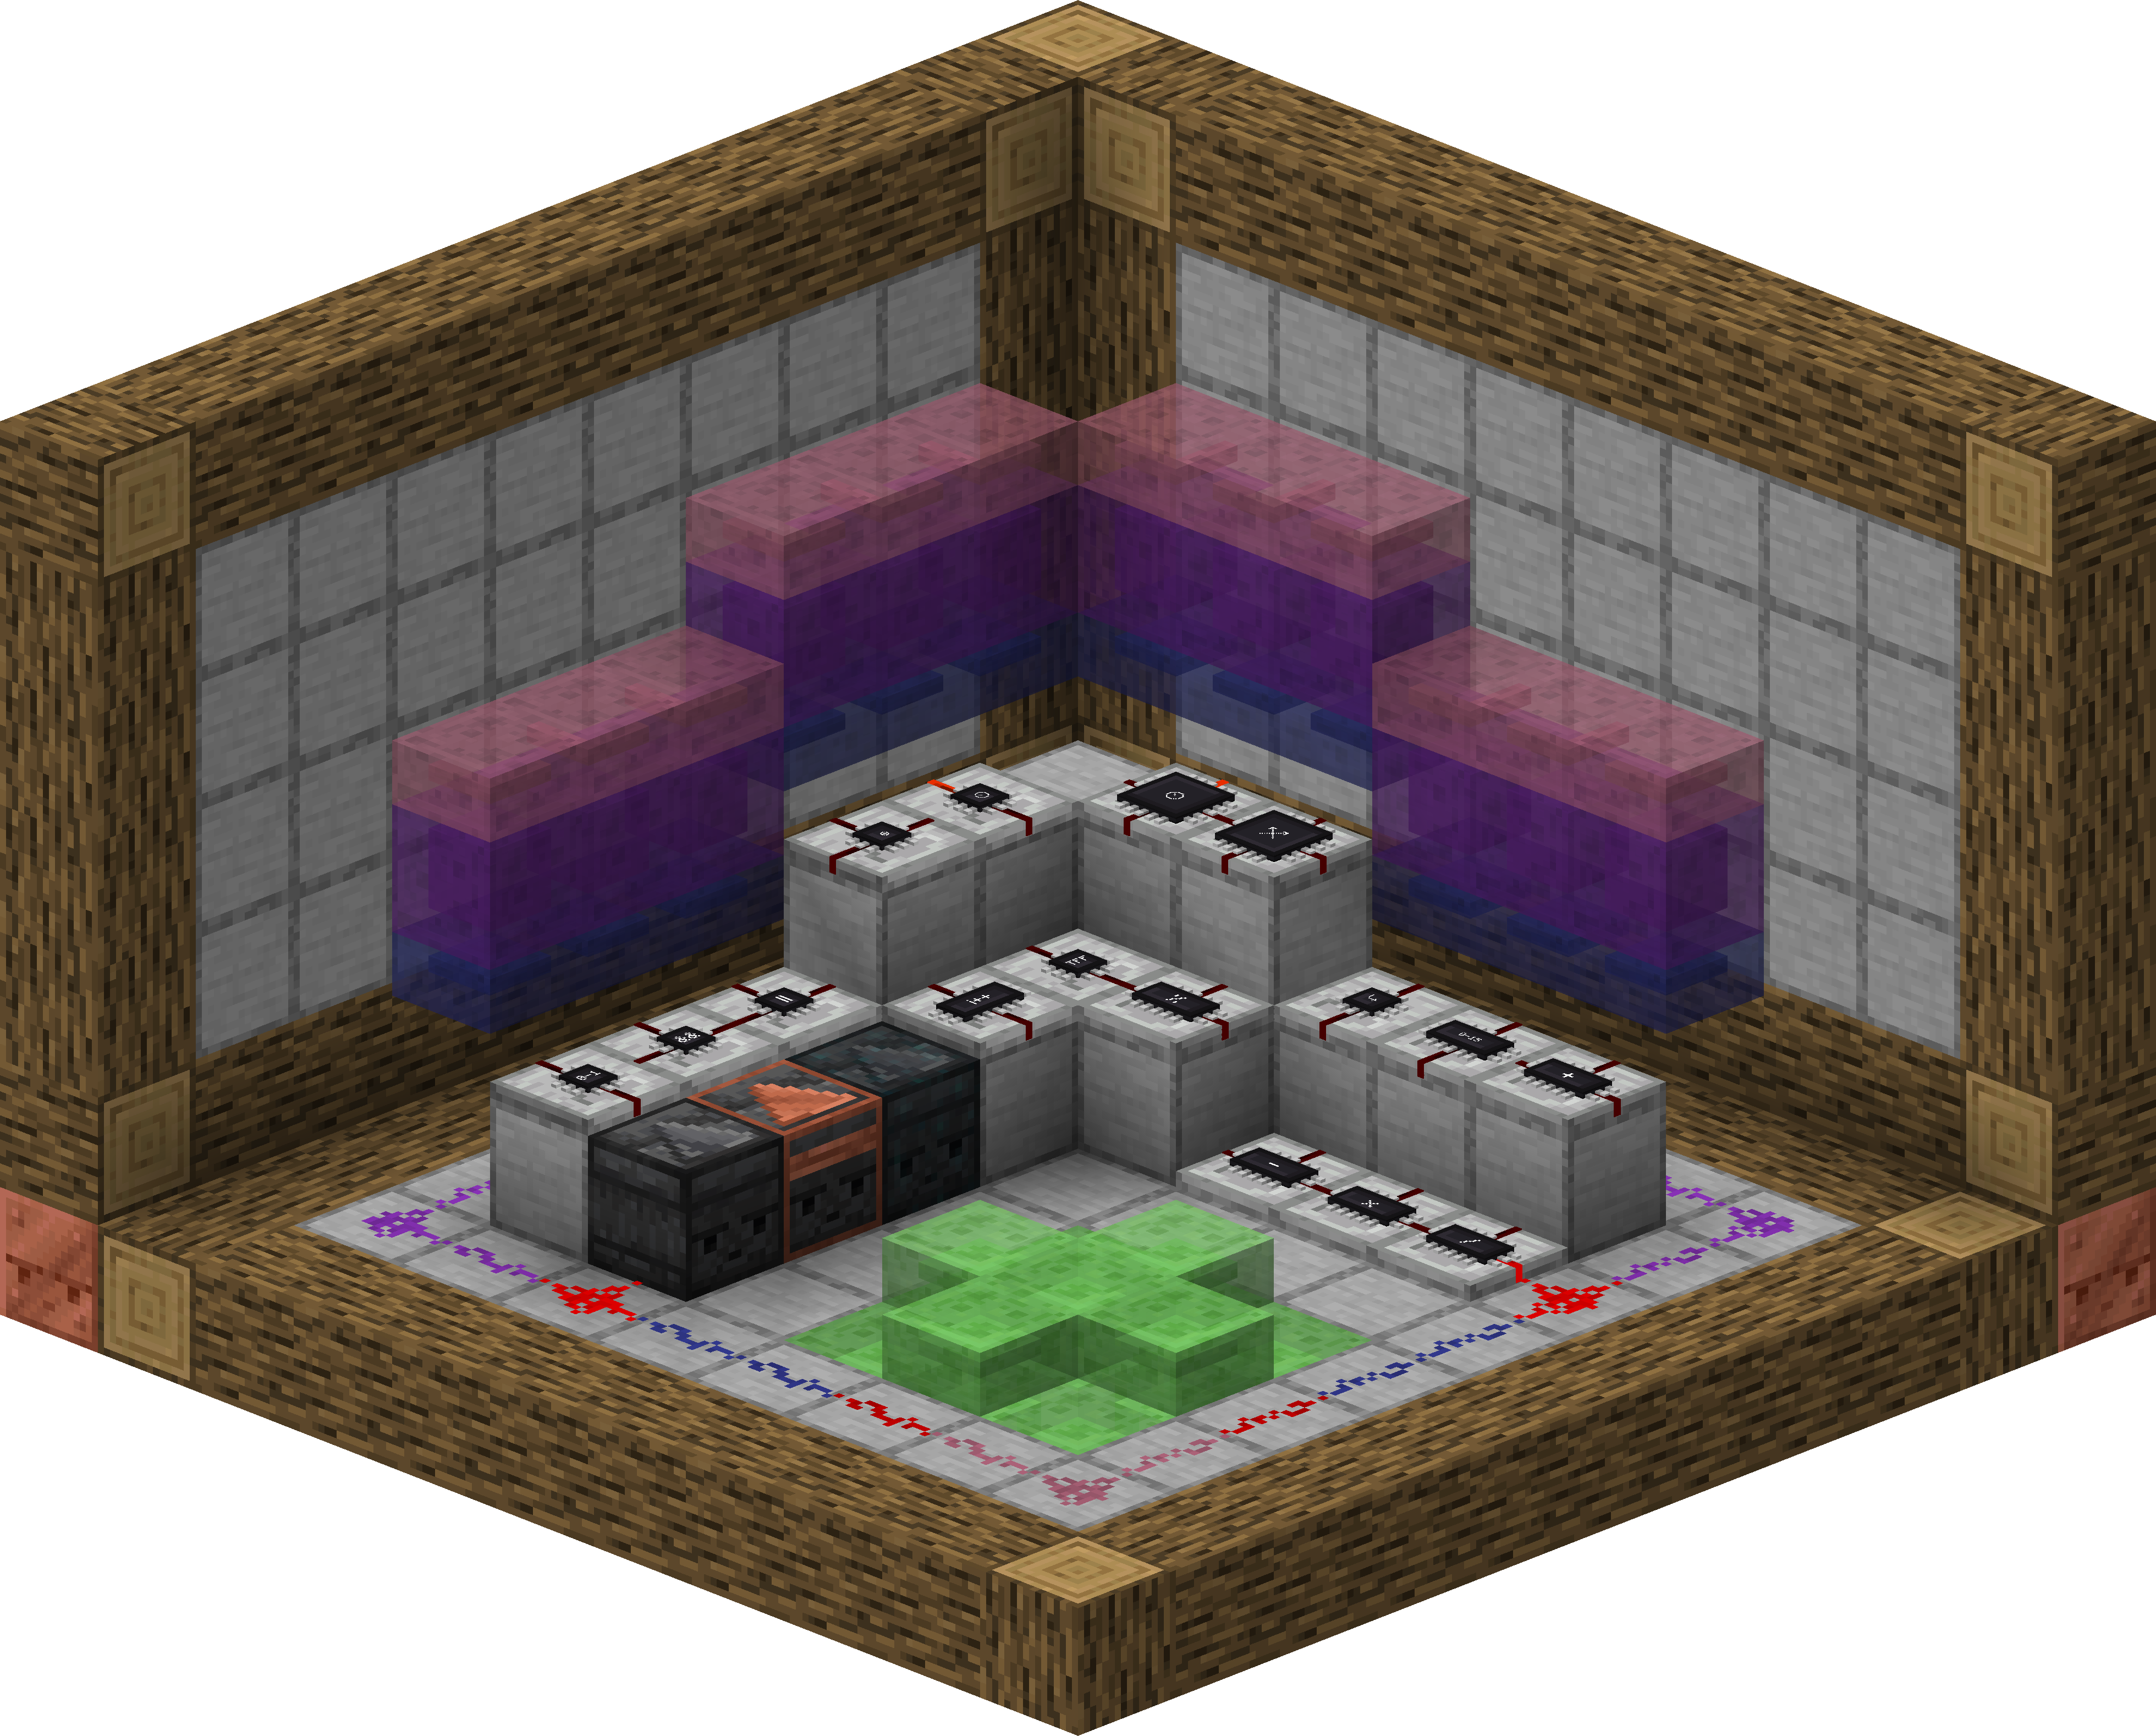 Showcase of the various gates, observers and colored blocks added!